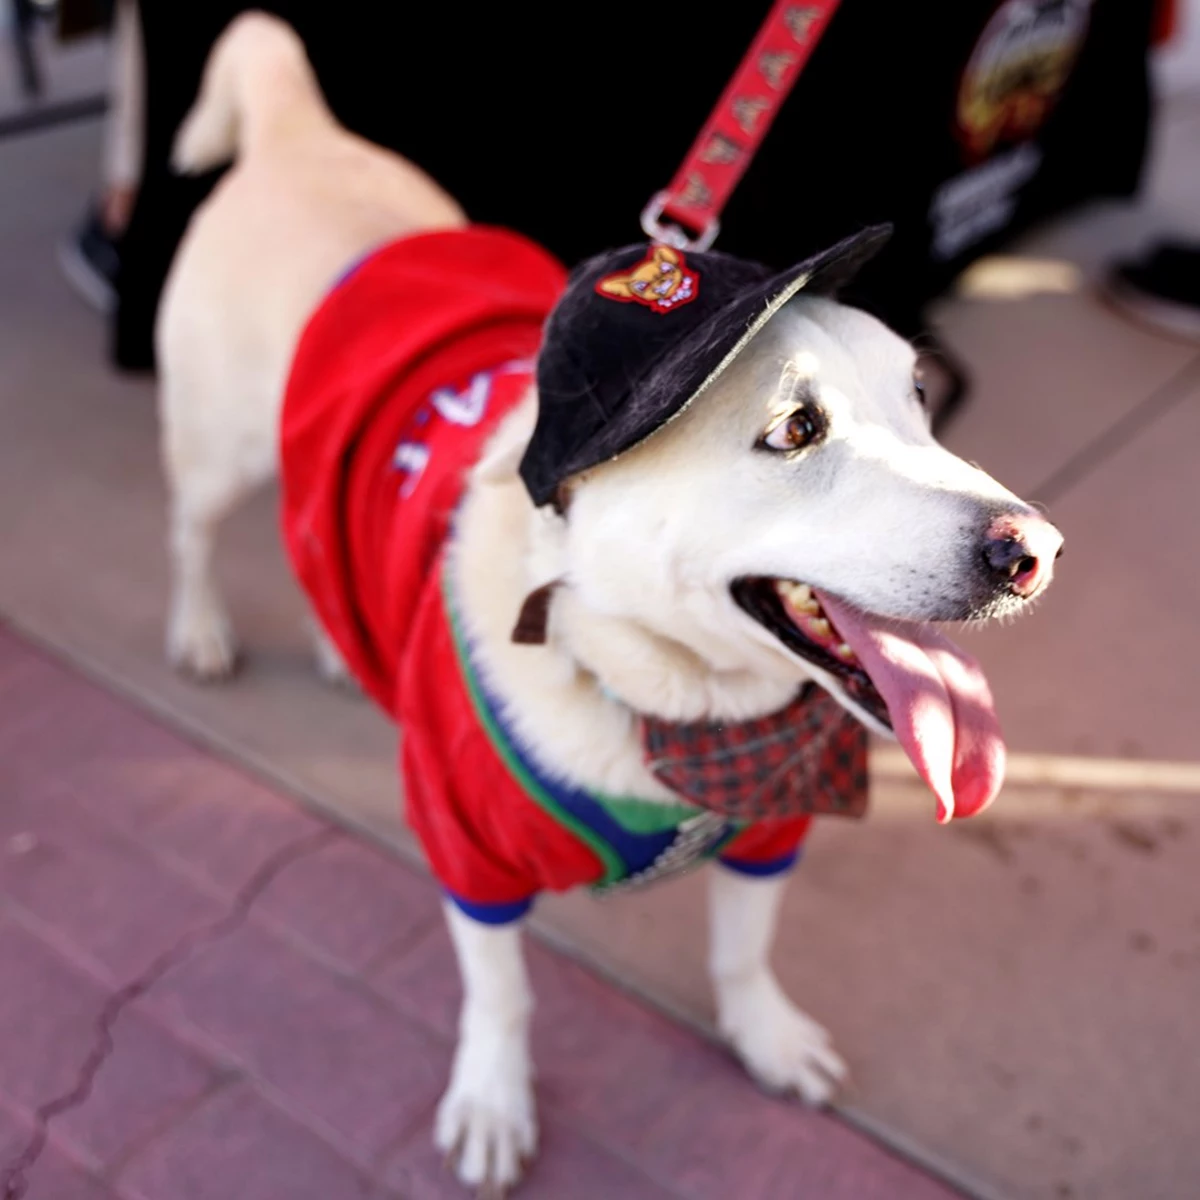 El Paso Chihuahuas don iconic dog-face jerseys for a dog-friendly